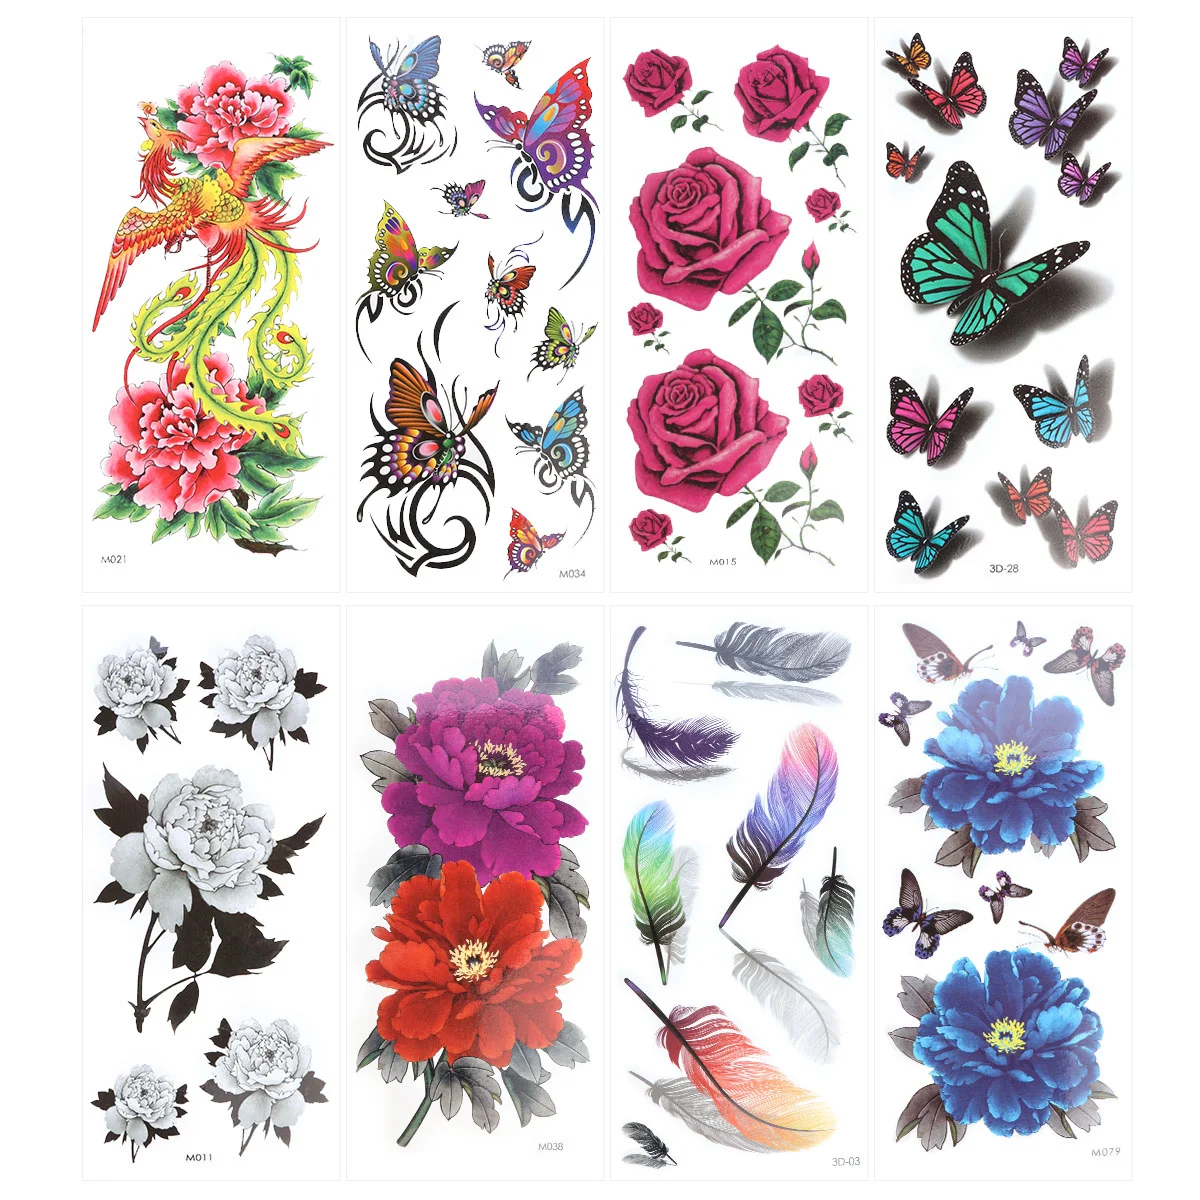 

8 Sheets 3D Flowers Temporary Tattoos Stickers, Roses, Butterflies and Multi- Colored Mixed Style Body Temporary Tattoos for,